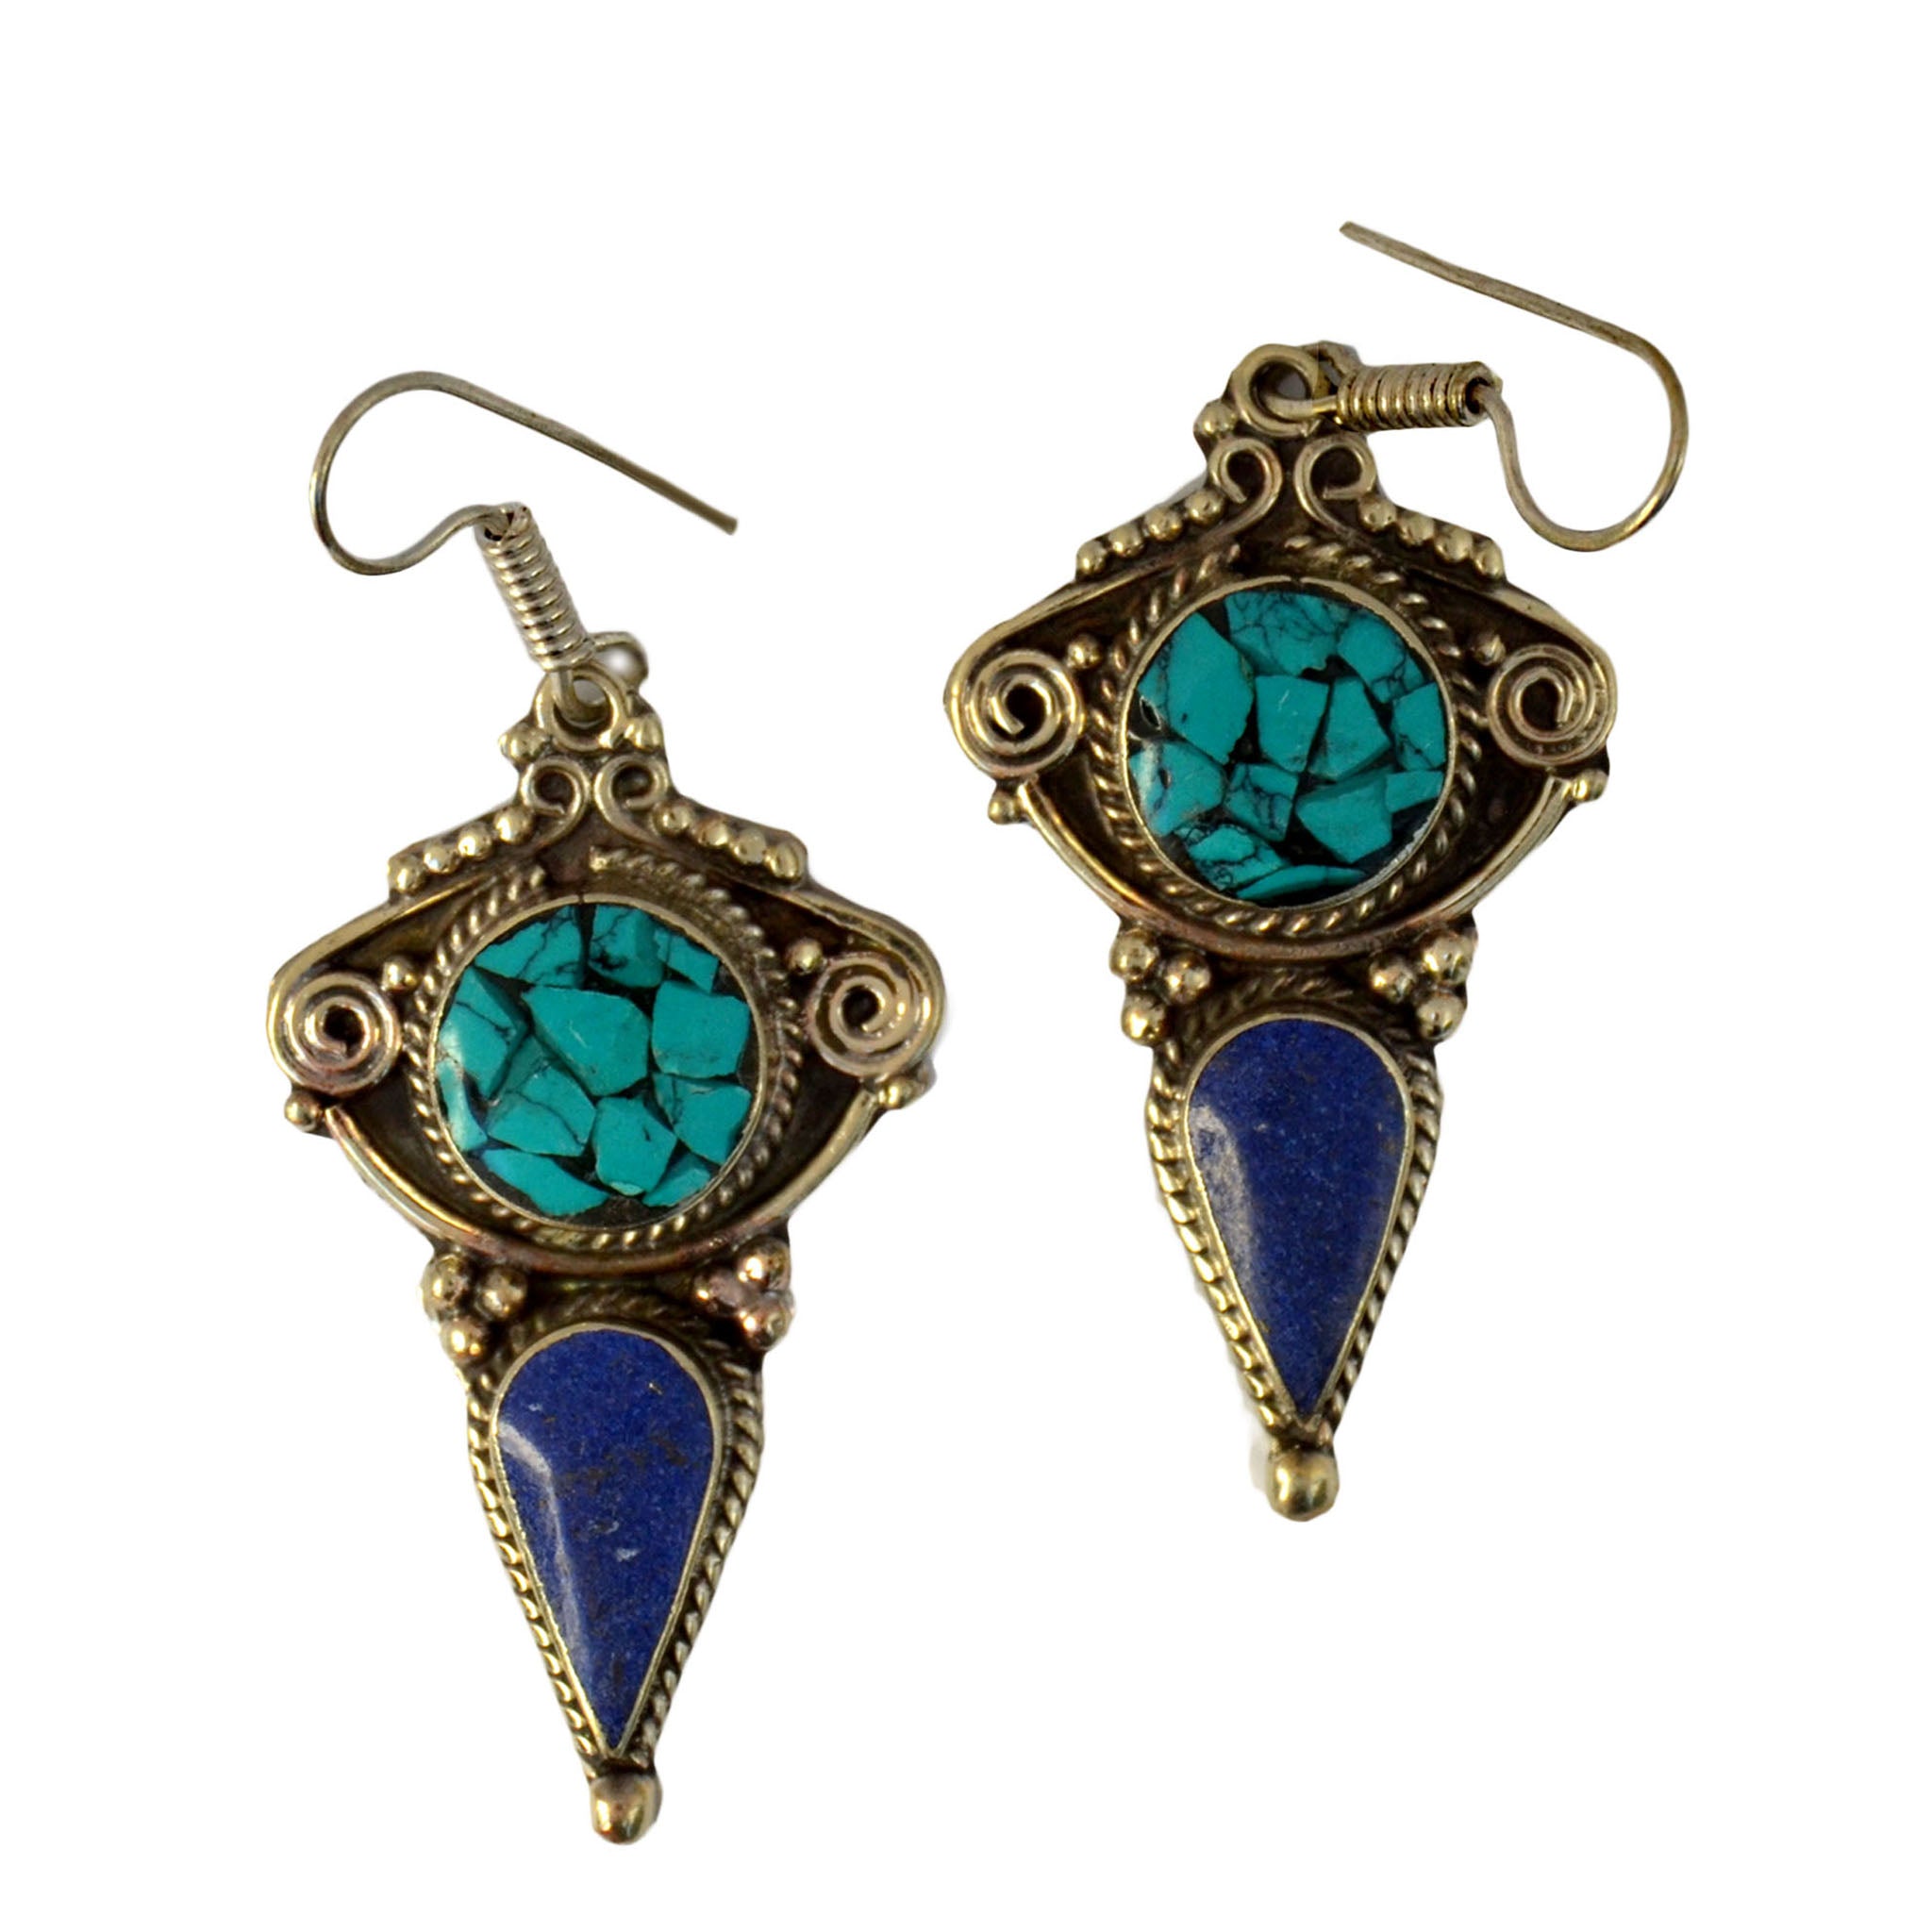 Ethnic silver drop earrings with inlay turquoise and lapis lazuli stones on white background